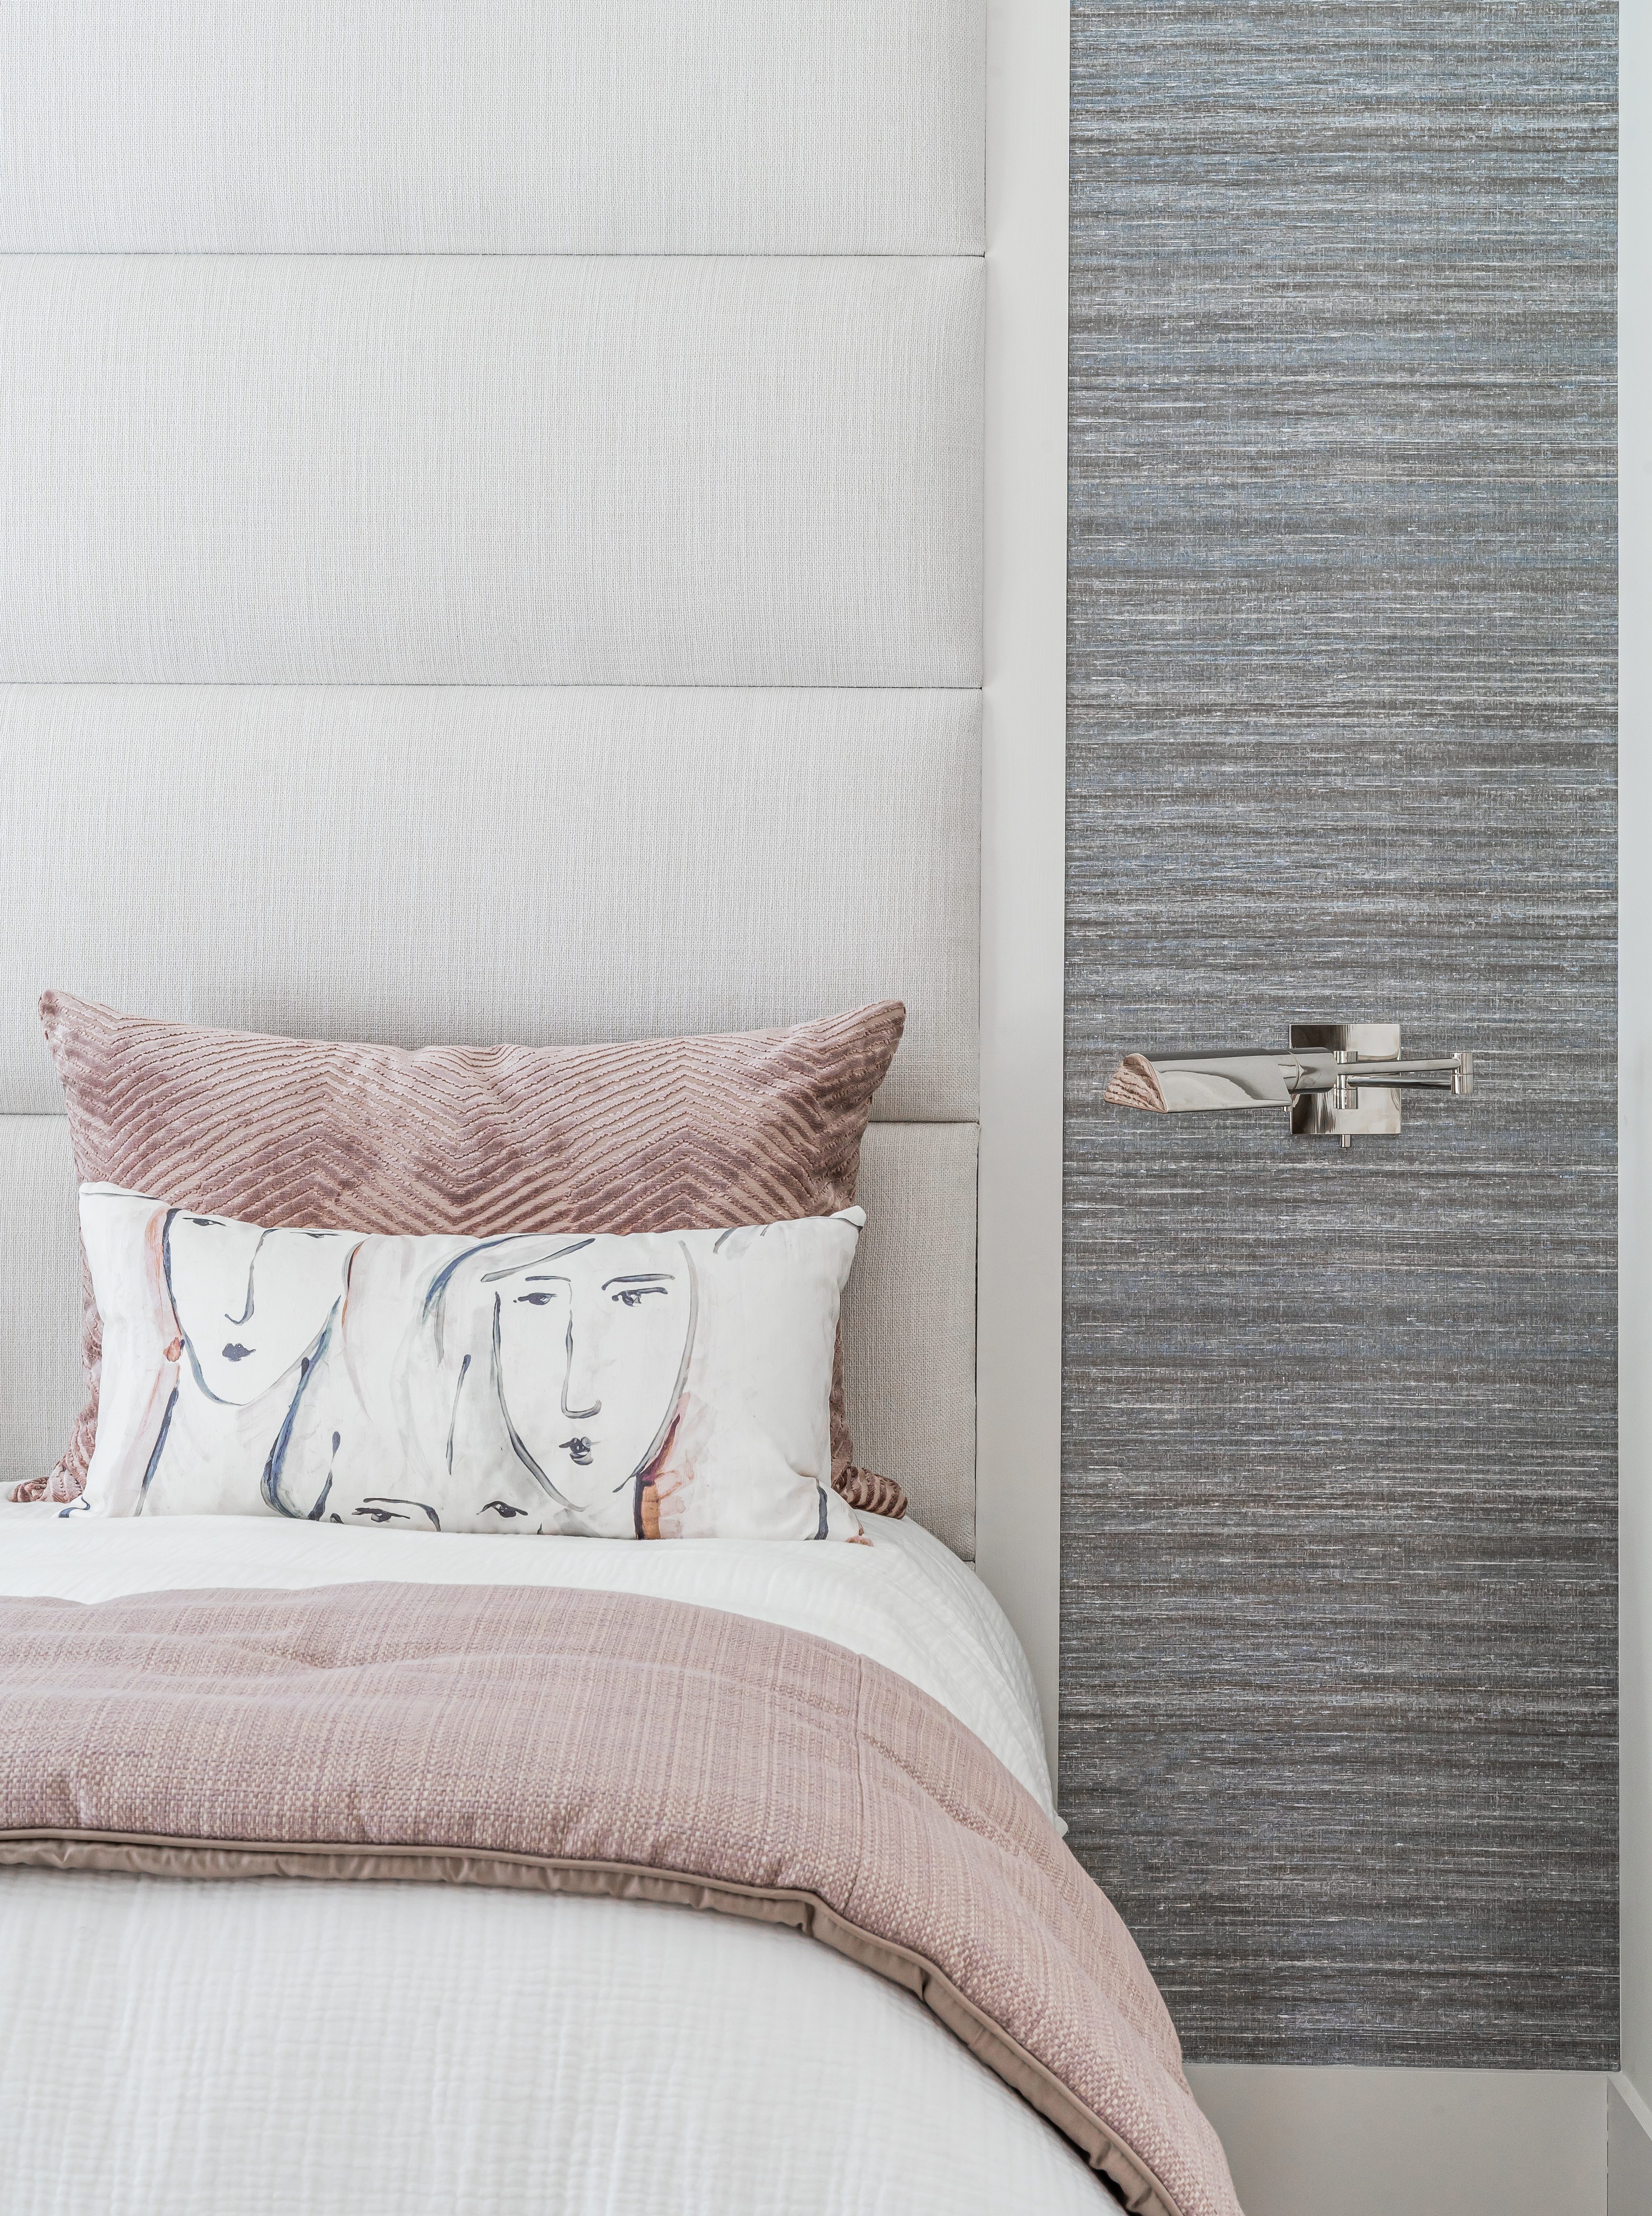 A coastal contemporary guest bedroom design with a blush and neutral palette, designed by Florida interior designer Brooke Meyer of Gulfshore Interior Design